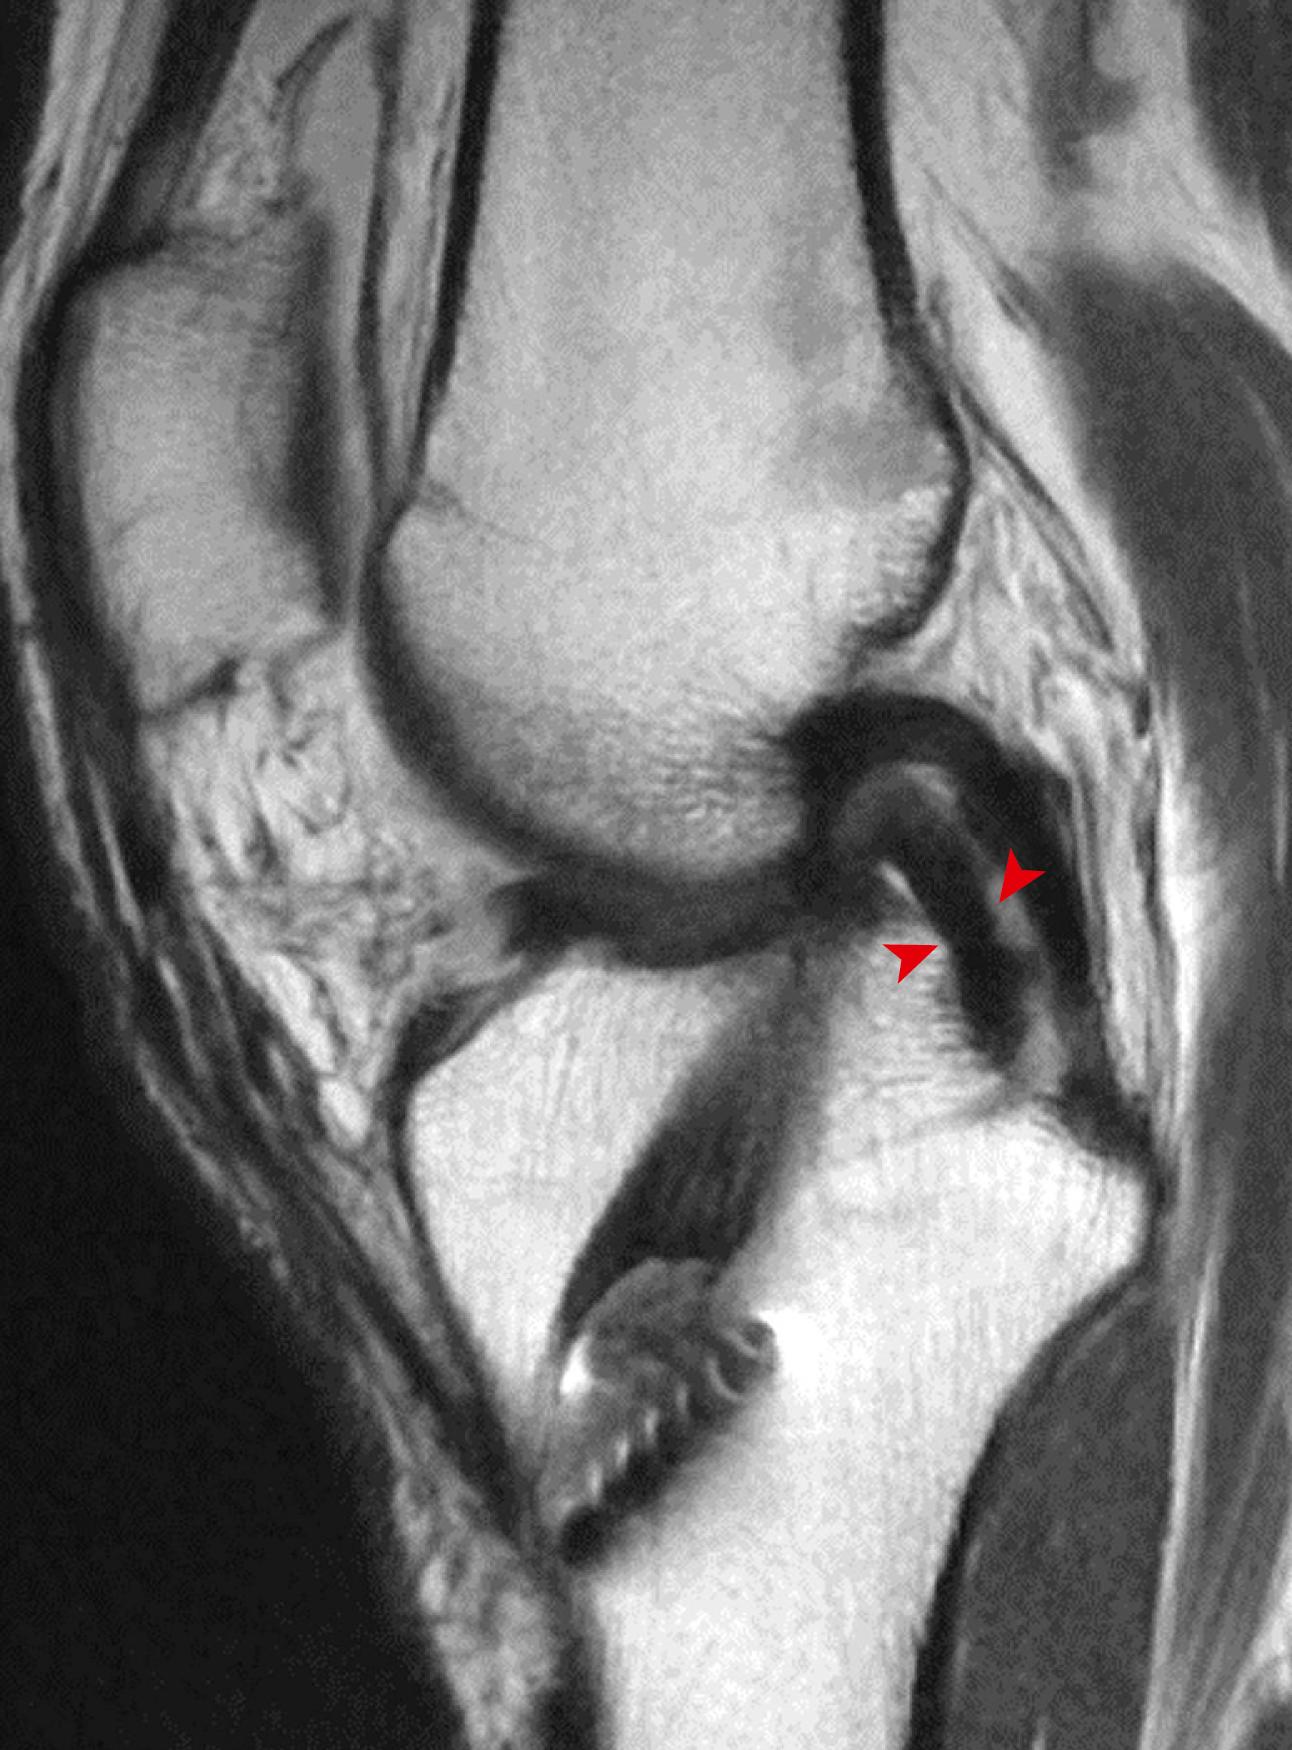 Fig. 3.7, Sagittal proton density magnetic resonance image demonstrating a double posterior cruciate ligament sign (red arrowheads) associated with an unreduced bucket handle tear of the medial meniscus in a patient status post–anterior cruciate ligament reconstruction.